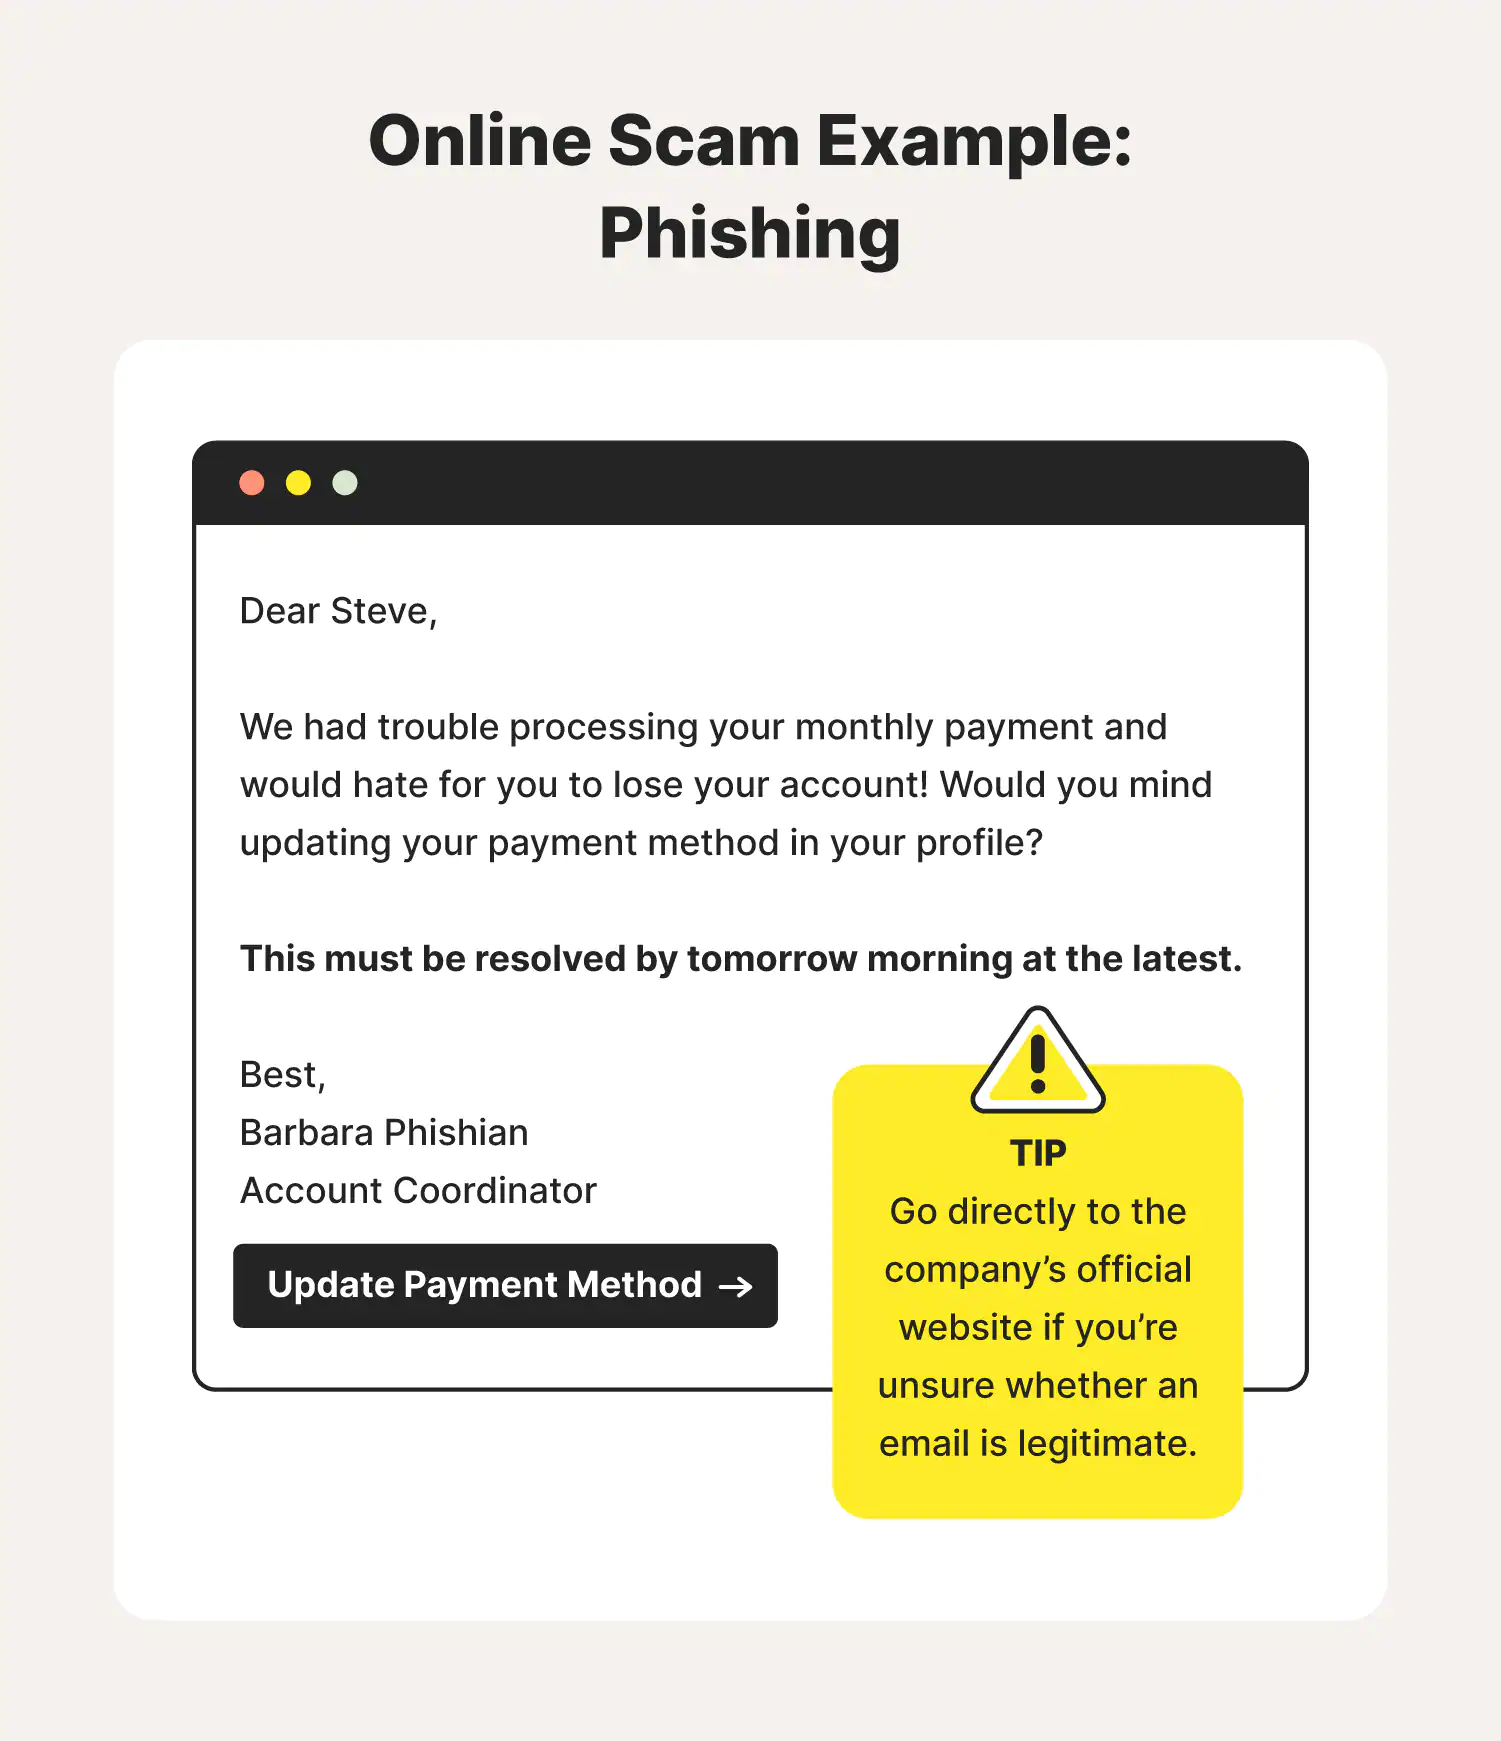 The phishing site prompts the victim to personal input data